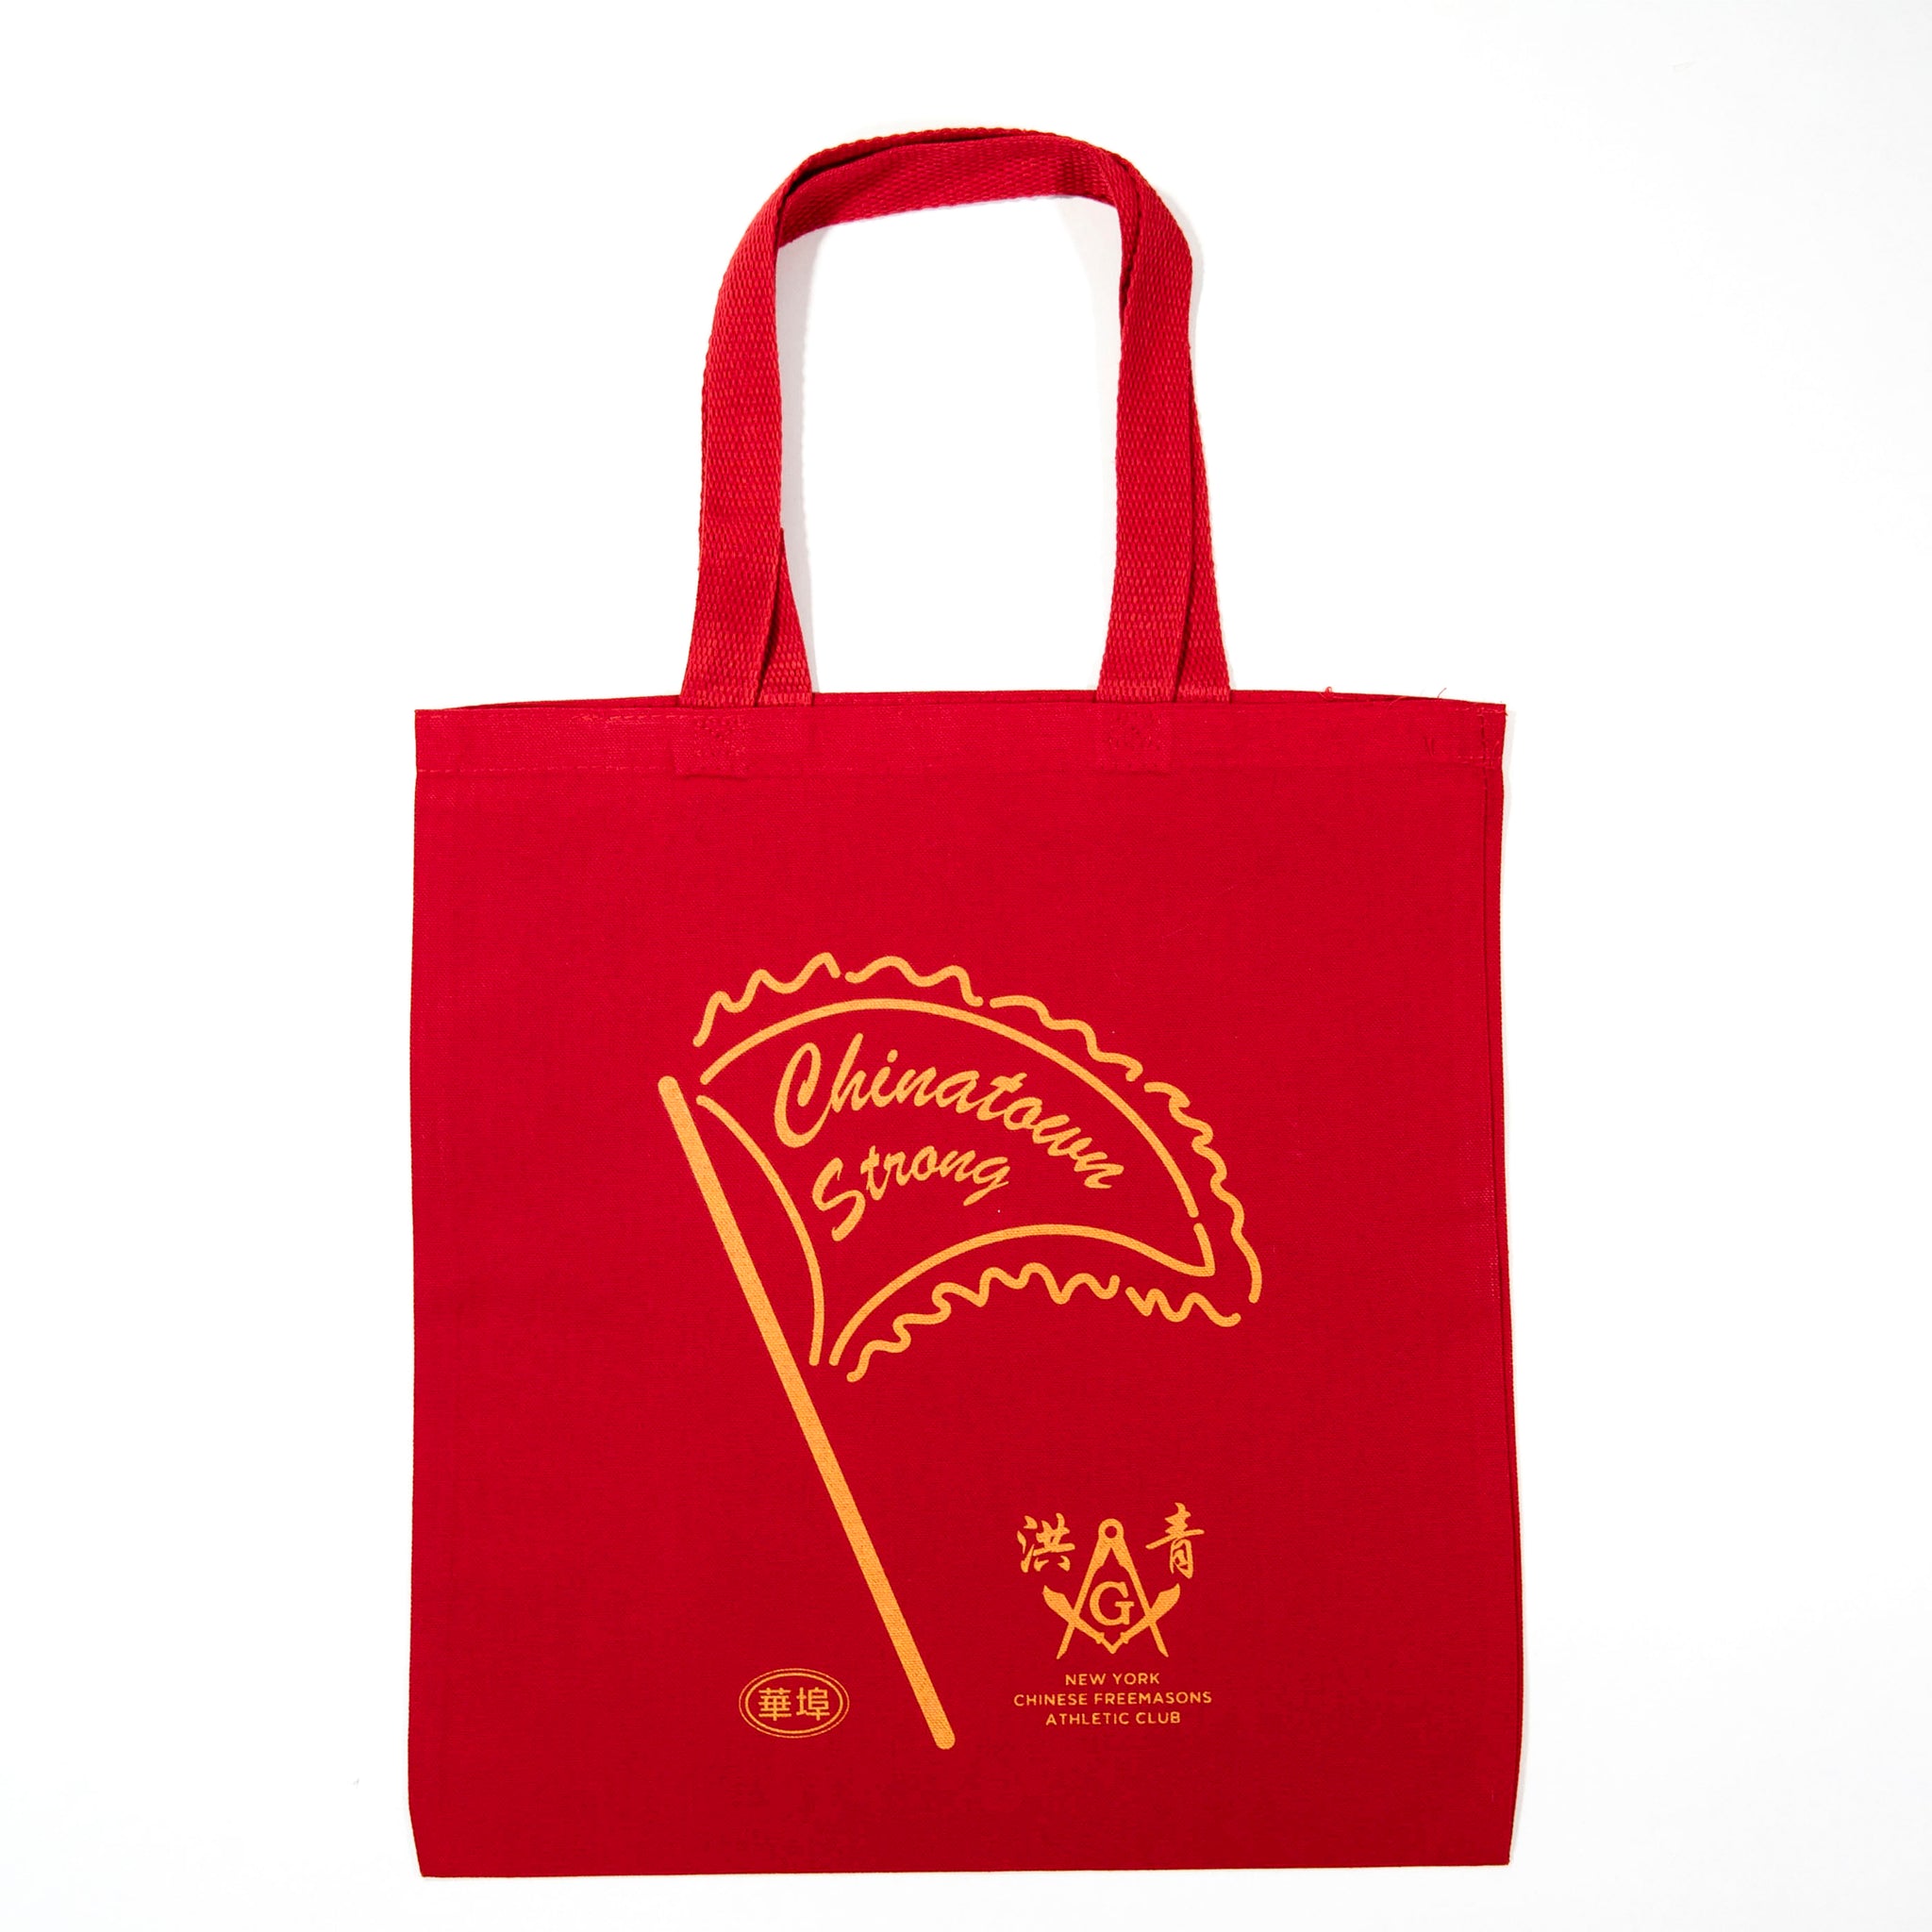 NY Chinese Freemasons Athletic Club x Made in Chinatown Tote